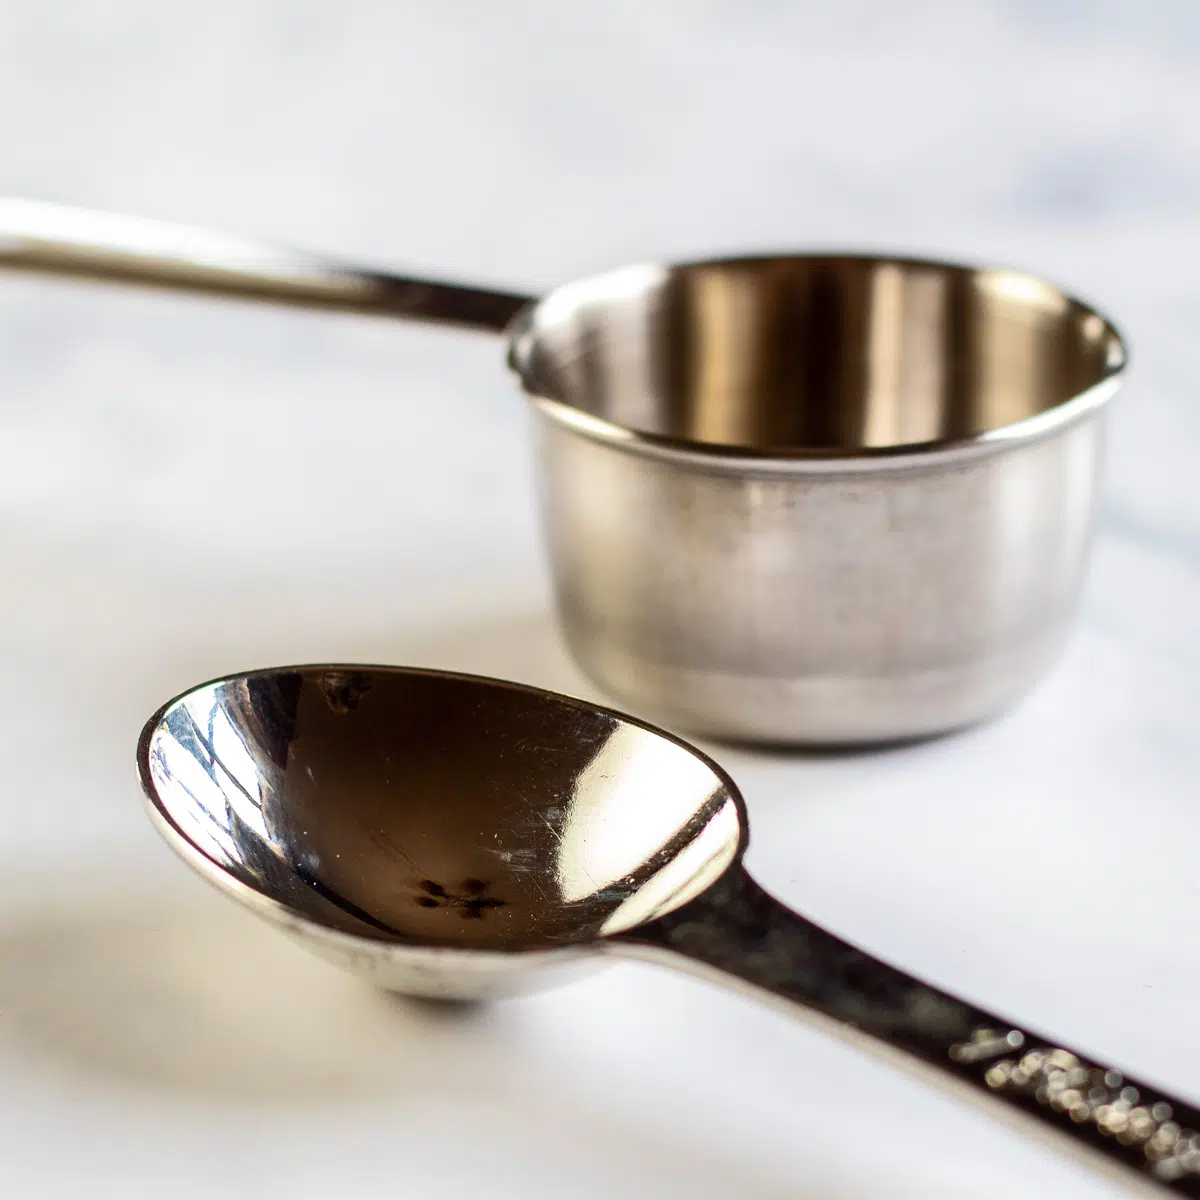 How many tablespoons in a ¼ cup with a side by side comparison of the two measuring units.